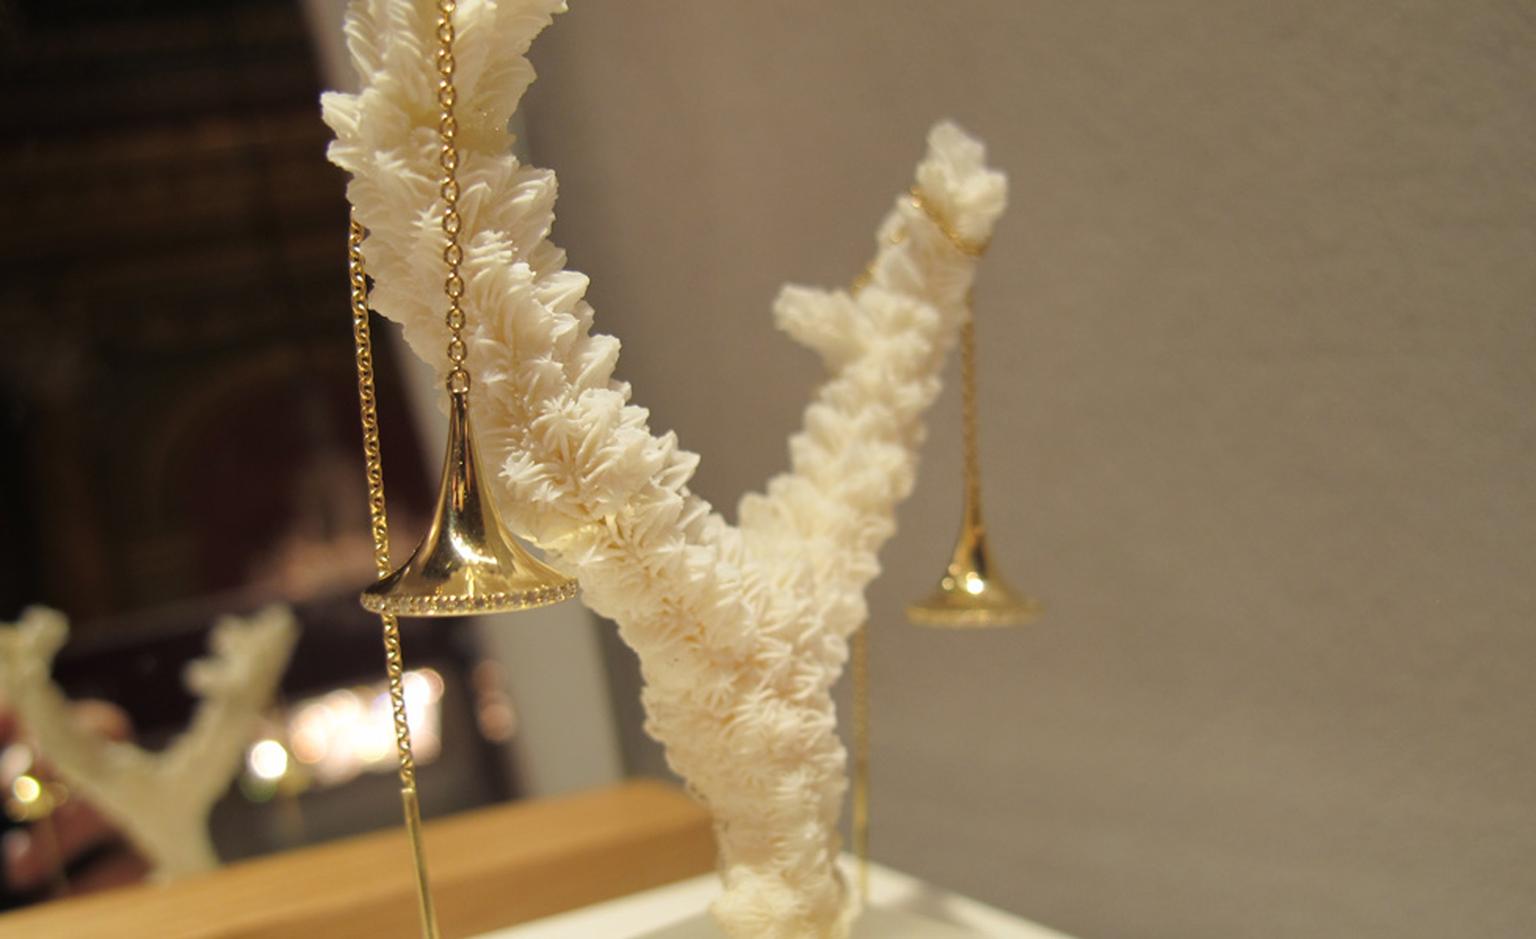 Dainty Trumpet earrings by Jessica Poole in gold with diamonds £700. Diamond free version for £160